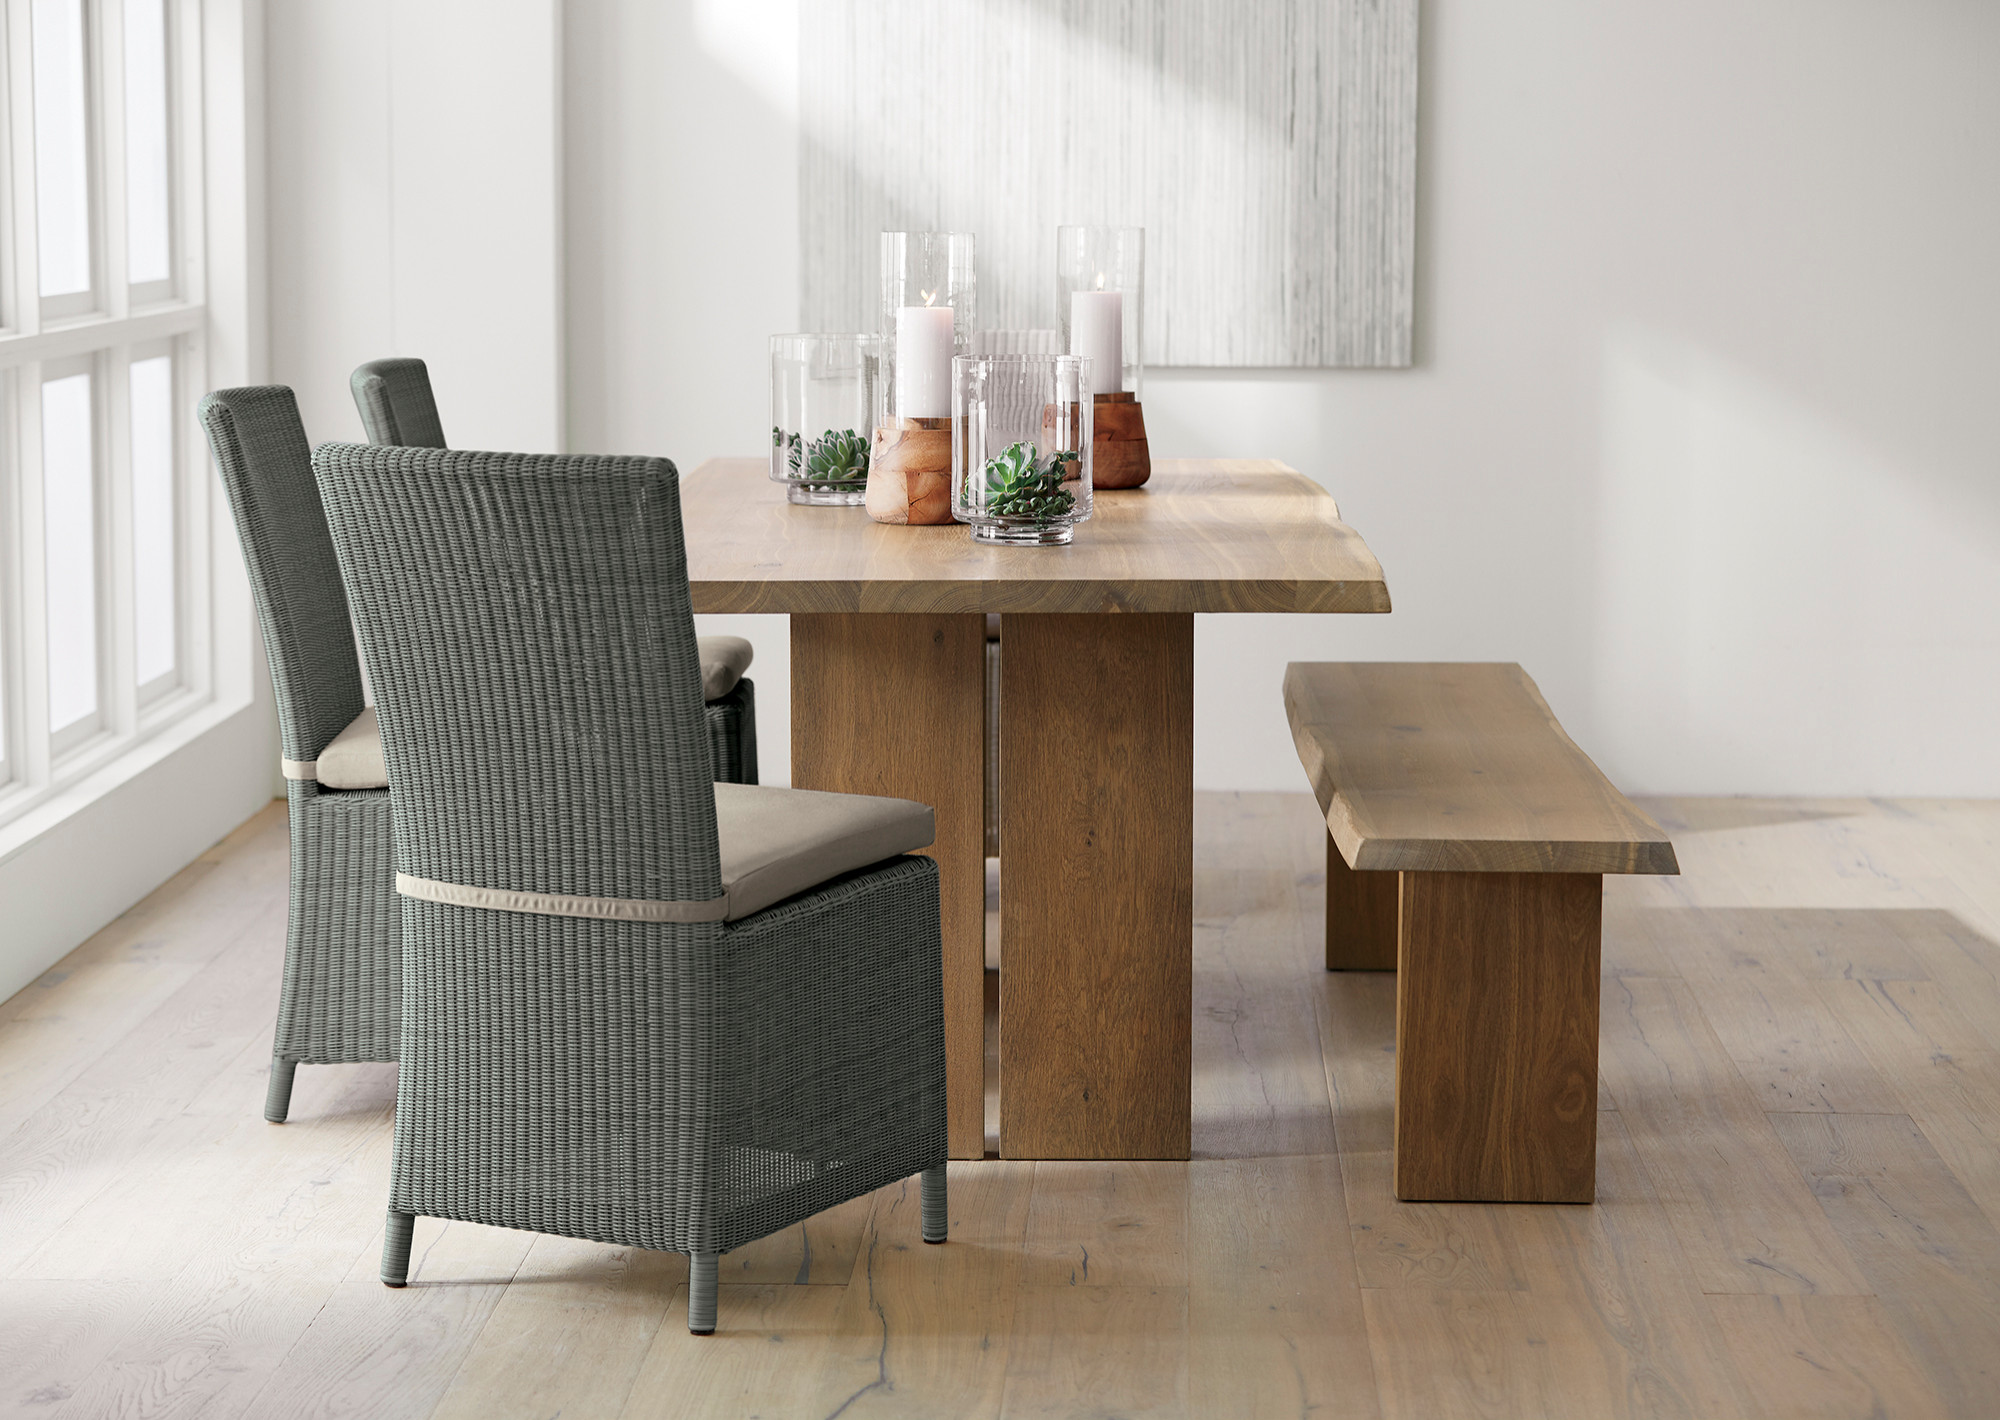 Crate And Barrel Dakota Dining Room Table